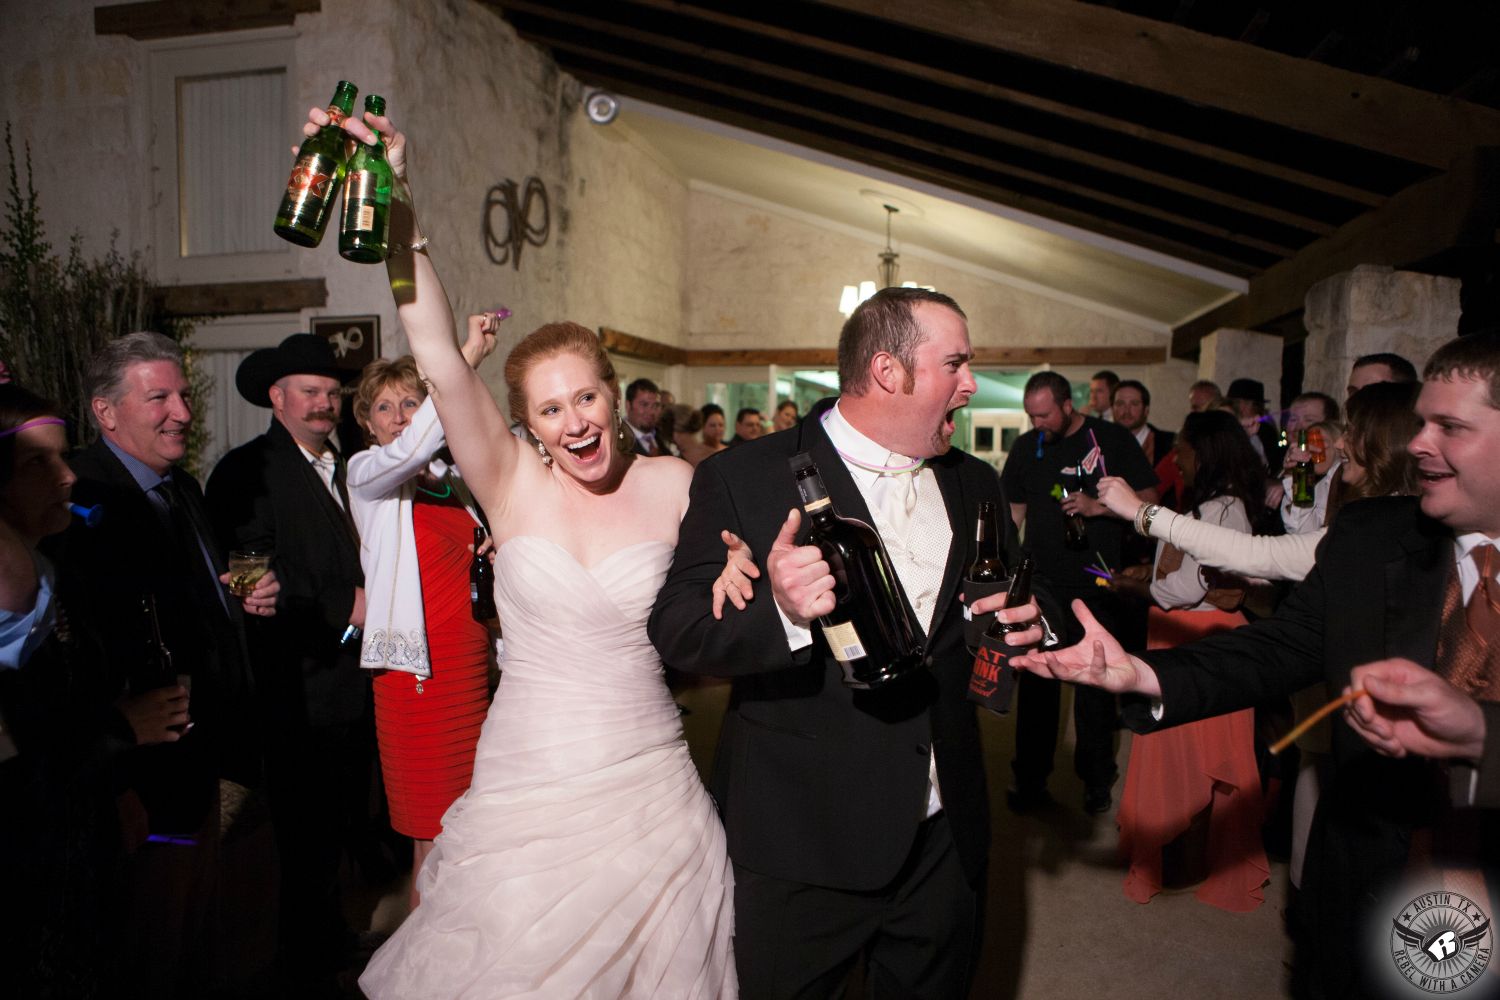 Wild tall red headed bride in pale pink ruffled wedding dress and groom in black tuxedo carry multiple bottles of alcohol and excitedly exit their wedding reception at Vintage Villas on Lake Travis. 